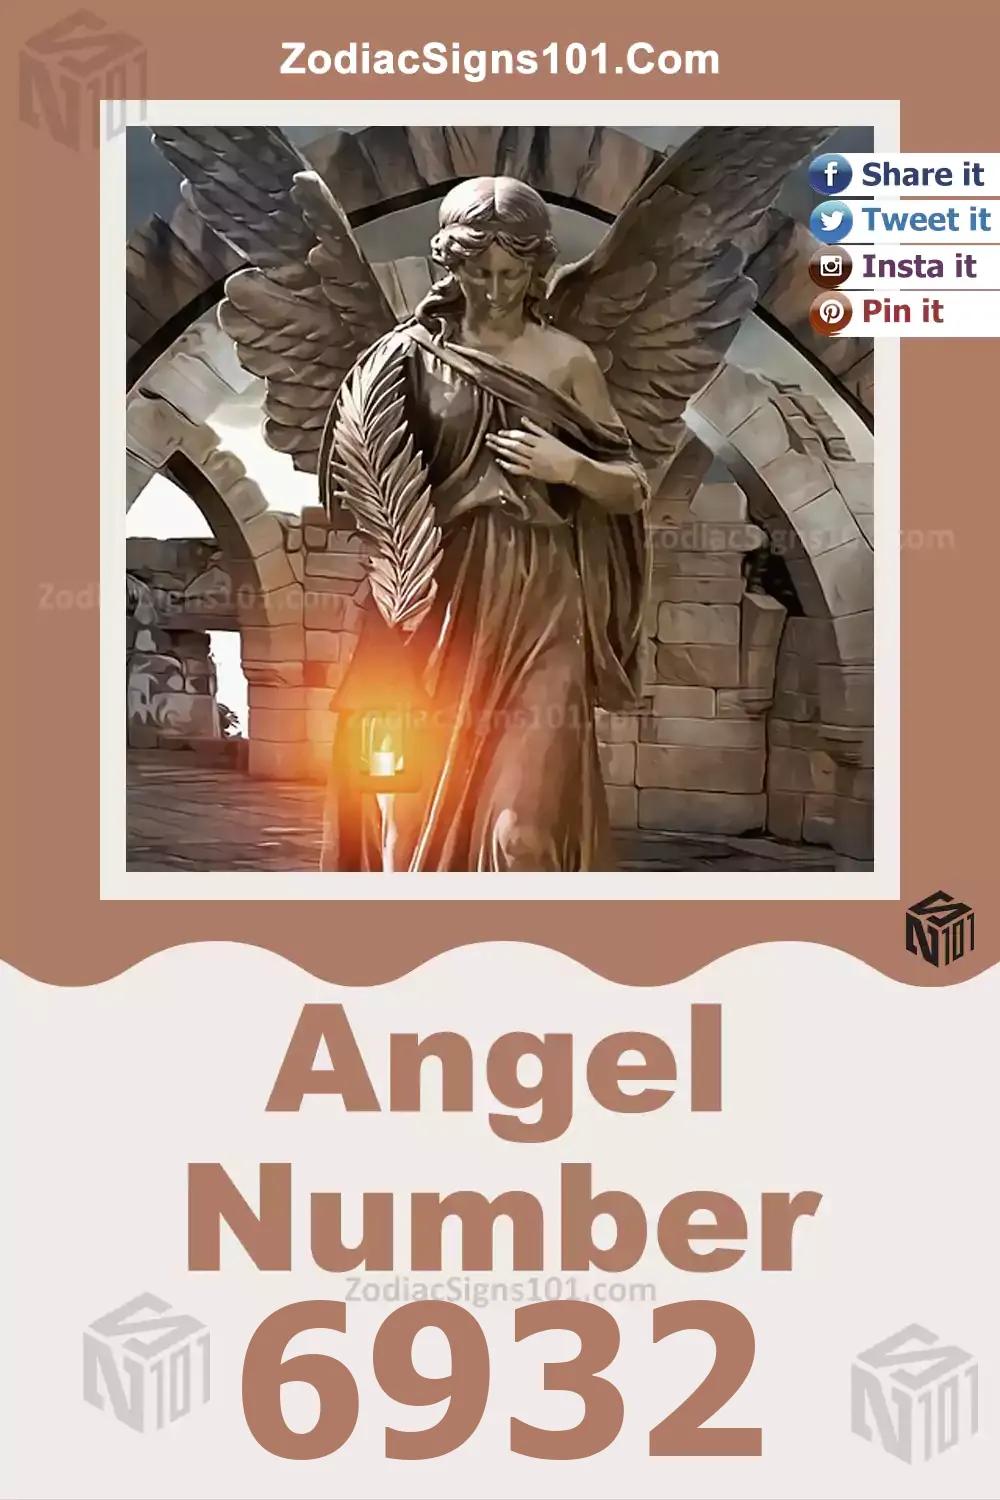 6932 Angel Number Meaning